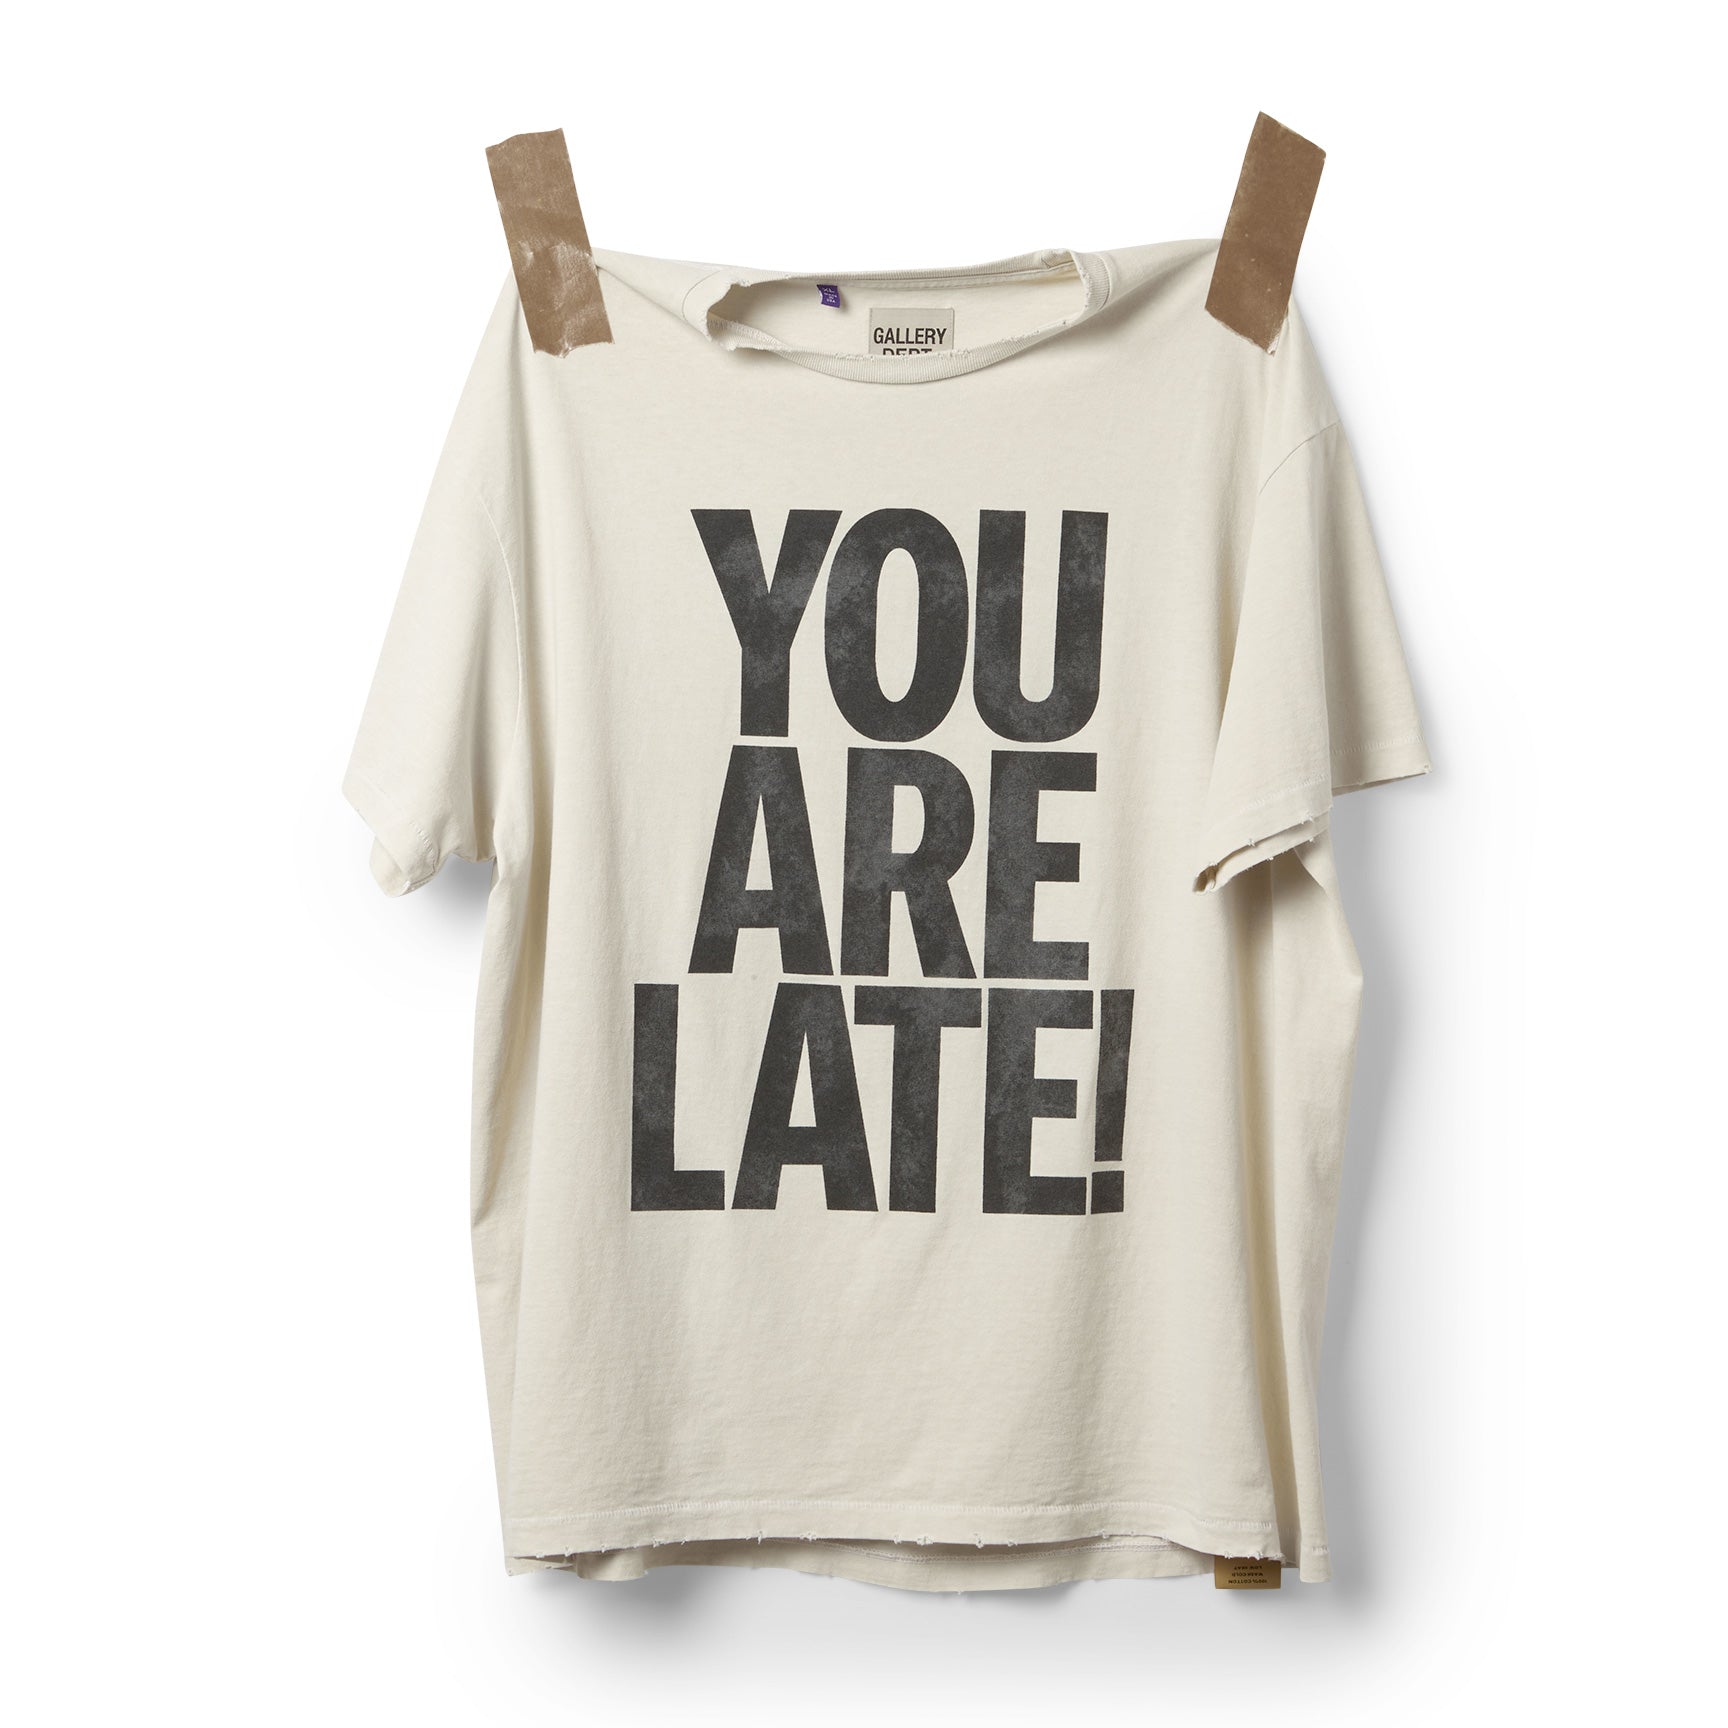 YOU ARE LATE TOPS Gallery Department Store   